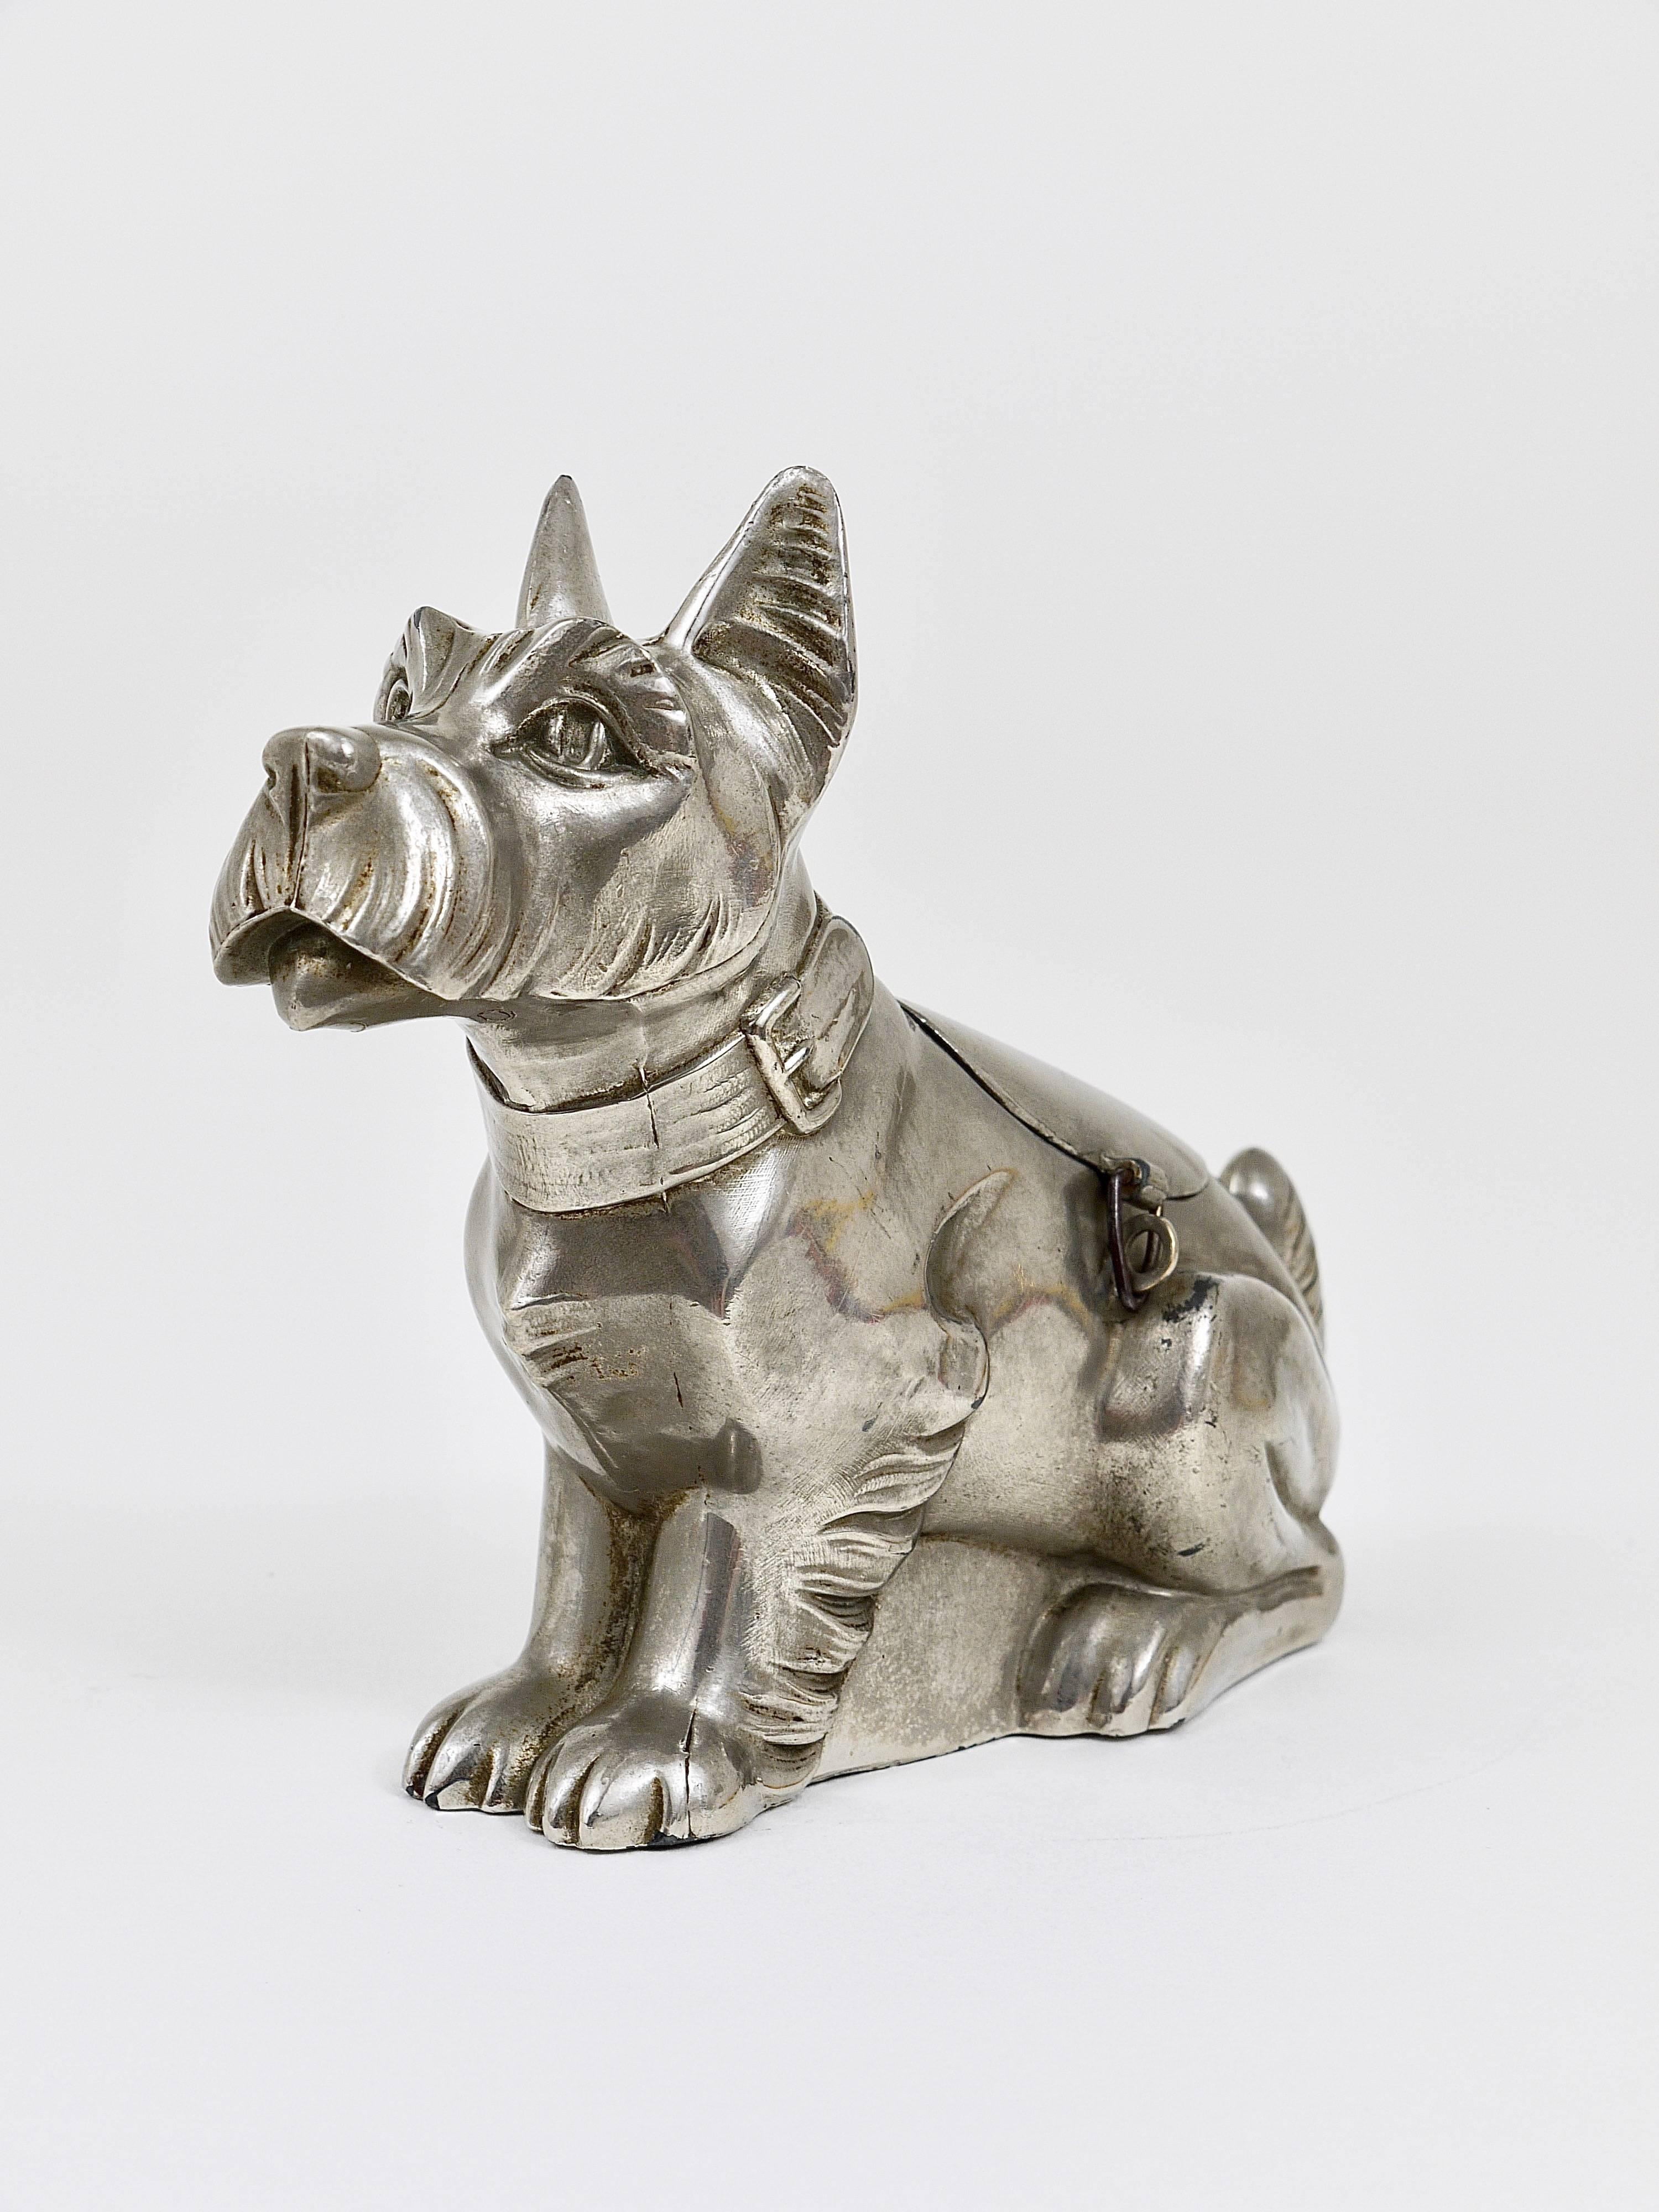 An unusual Art Deco piggy bank /savings box displaying a Schauzer dog. Made of tin in the 1930s in France. A beautiful piece.
       